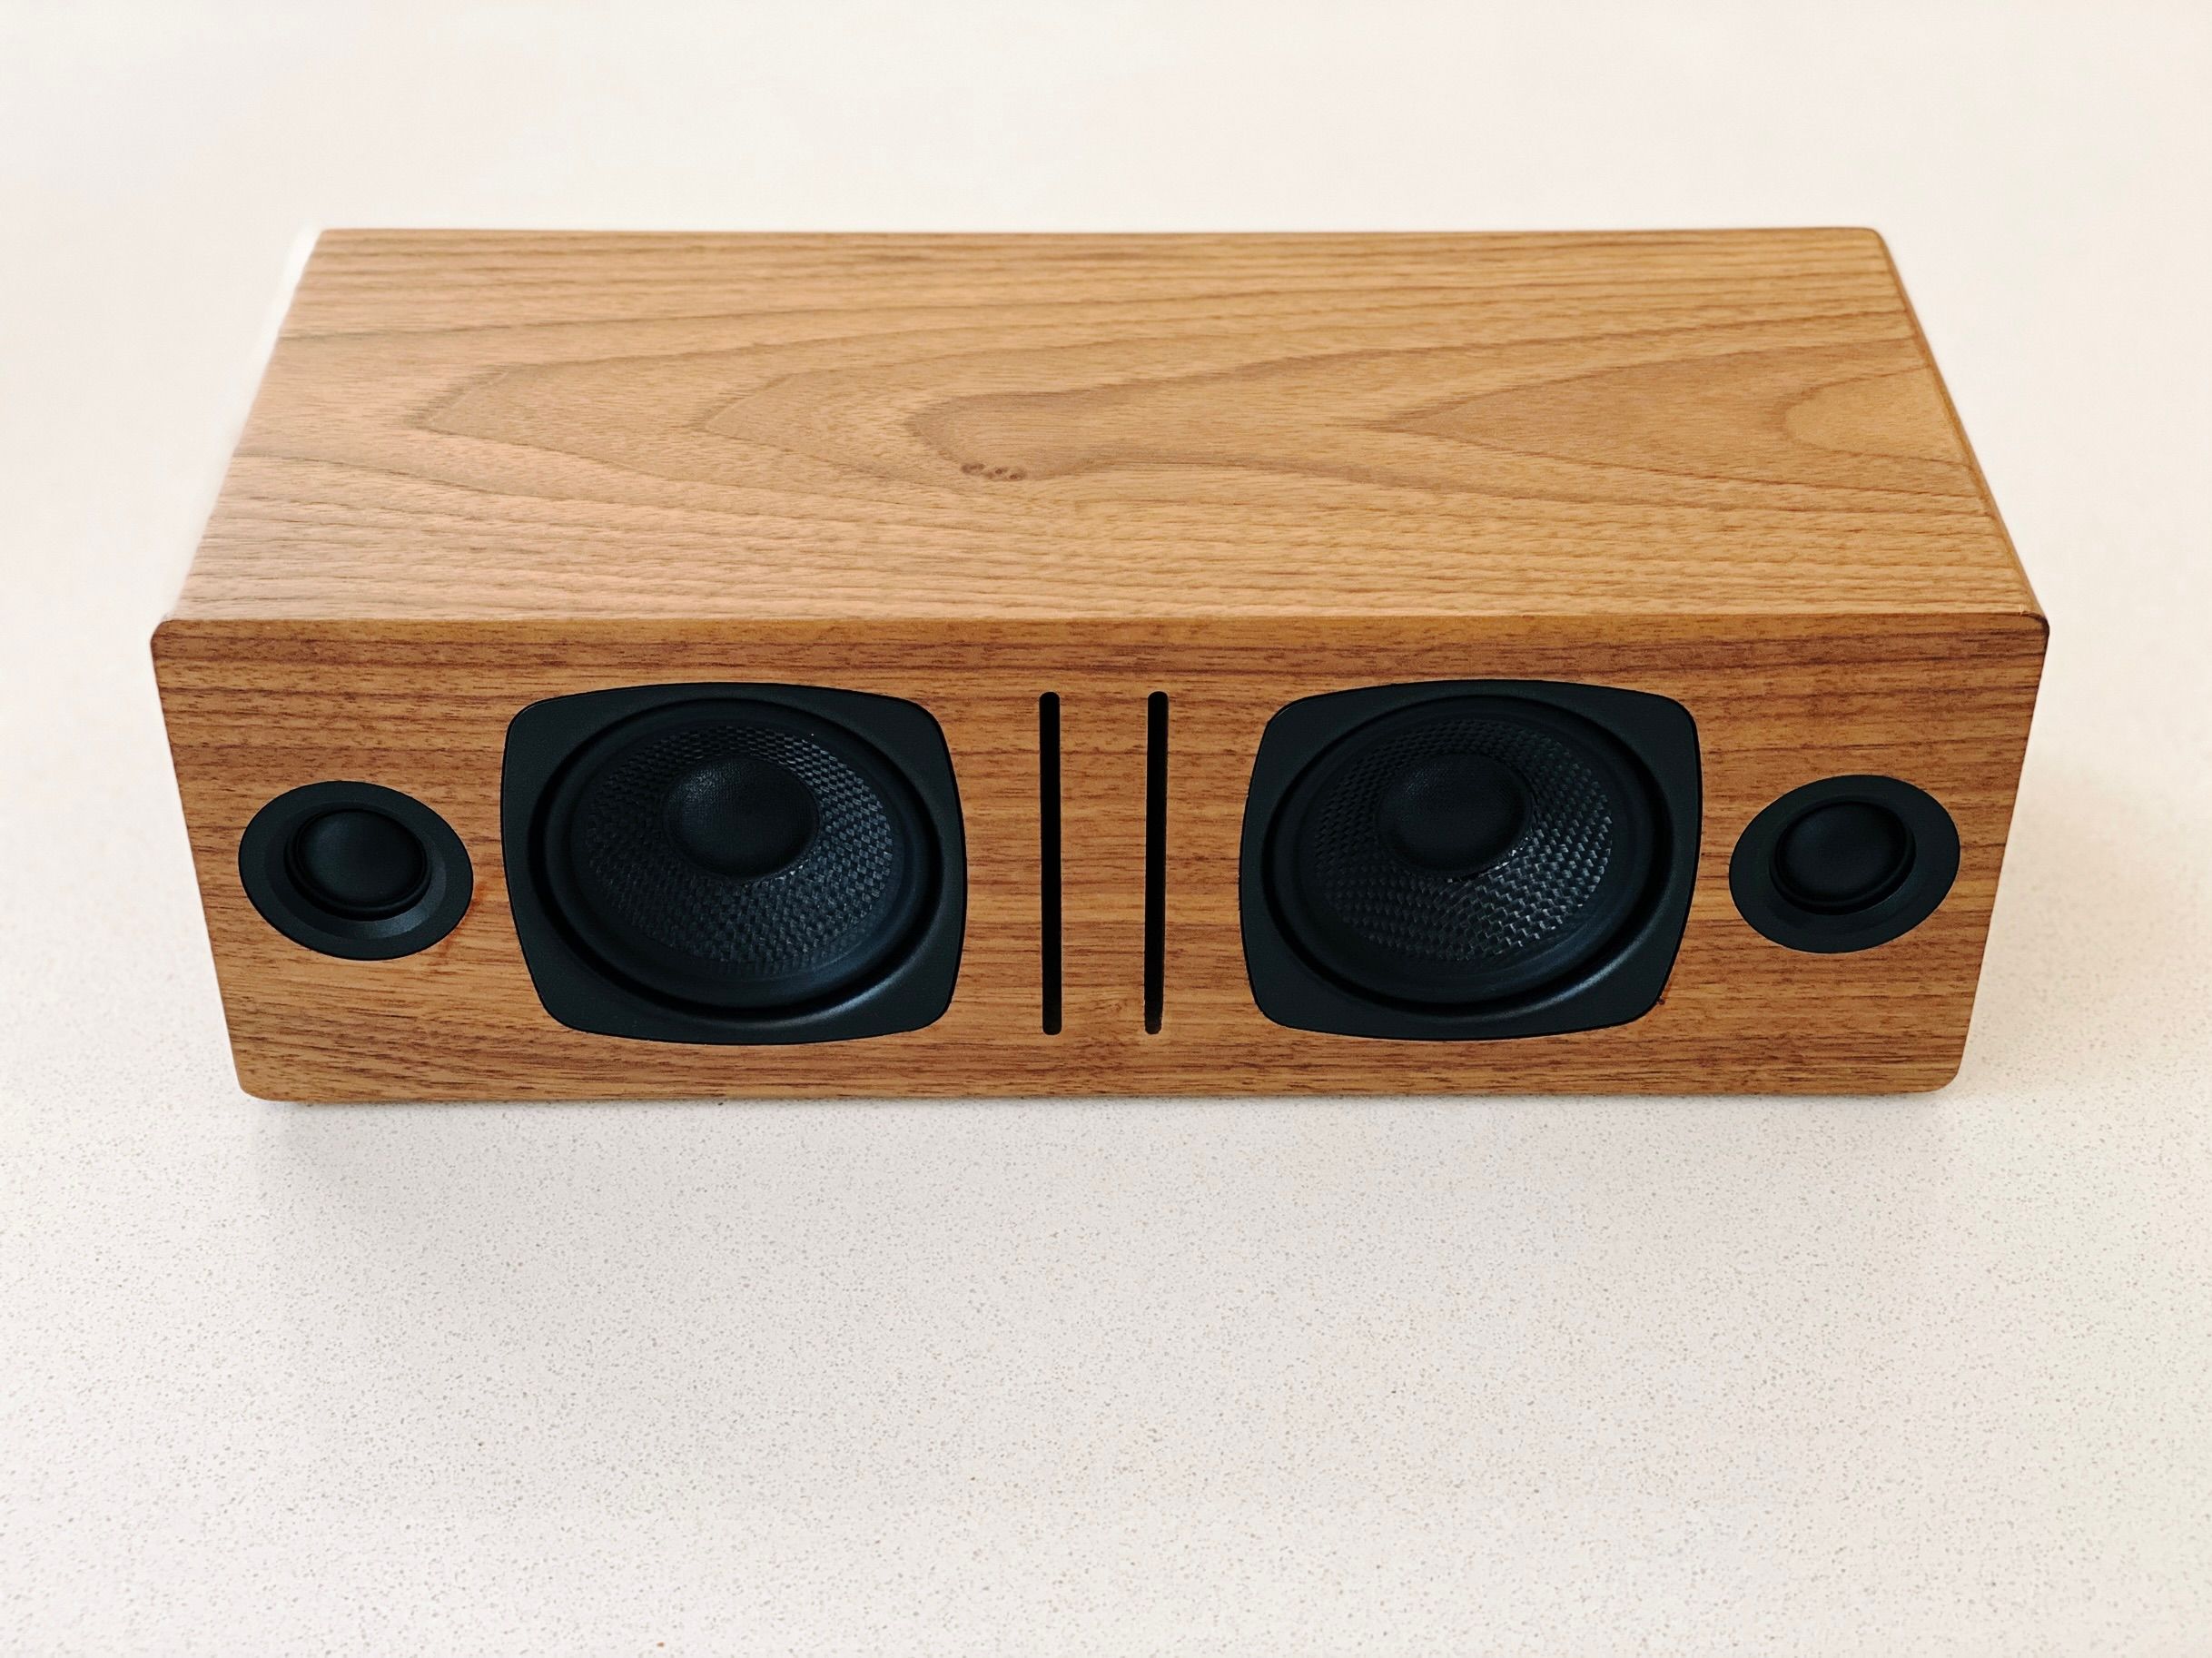 The same speaker but without the grill, showing the individual speakers inside it. There's two woofers towards the middle, and two tweeters on either end.